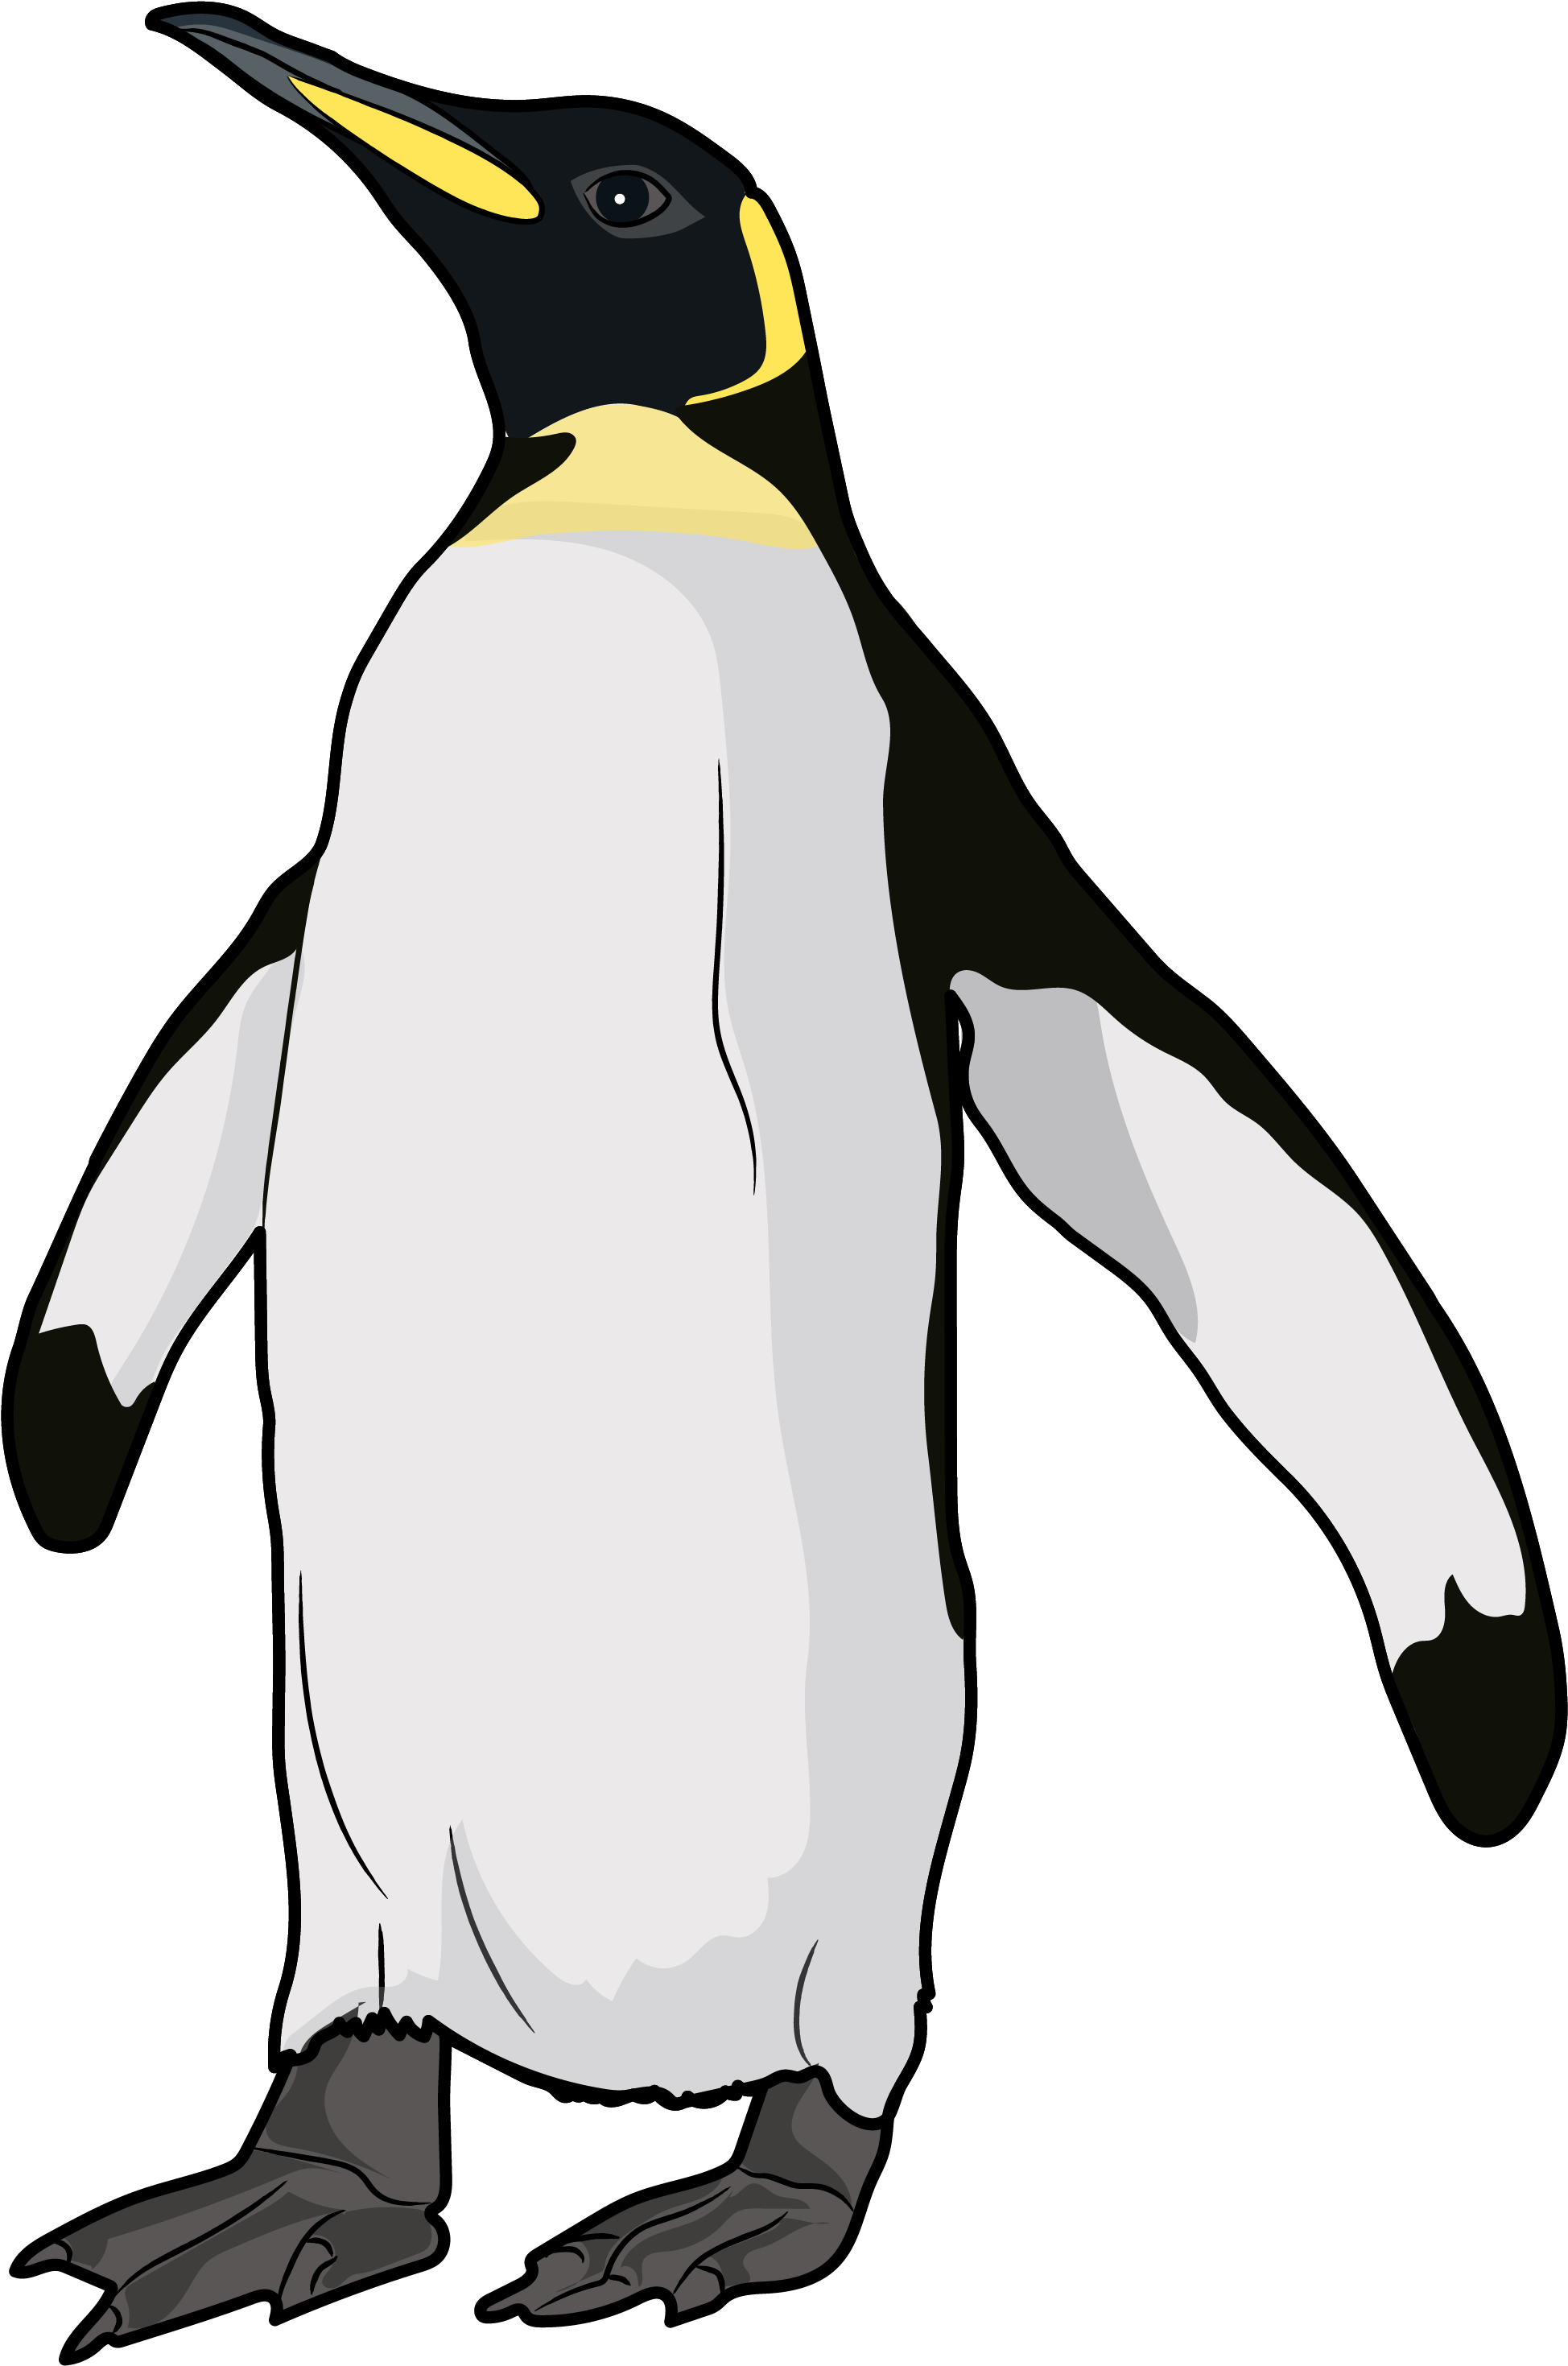 A Penguin With A Black Background